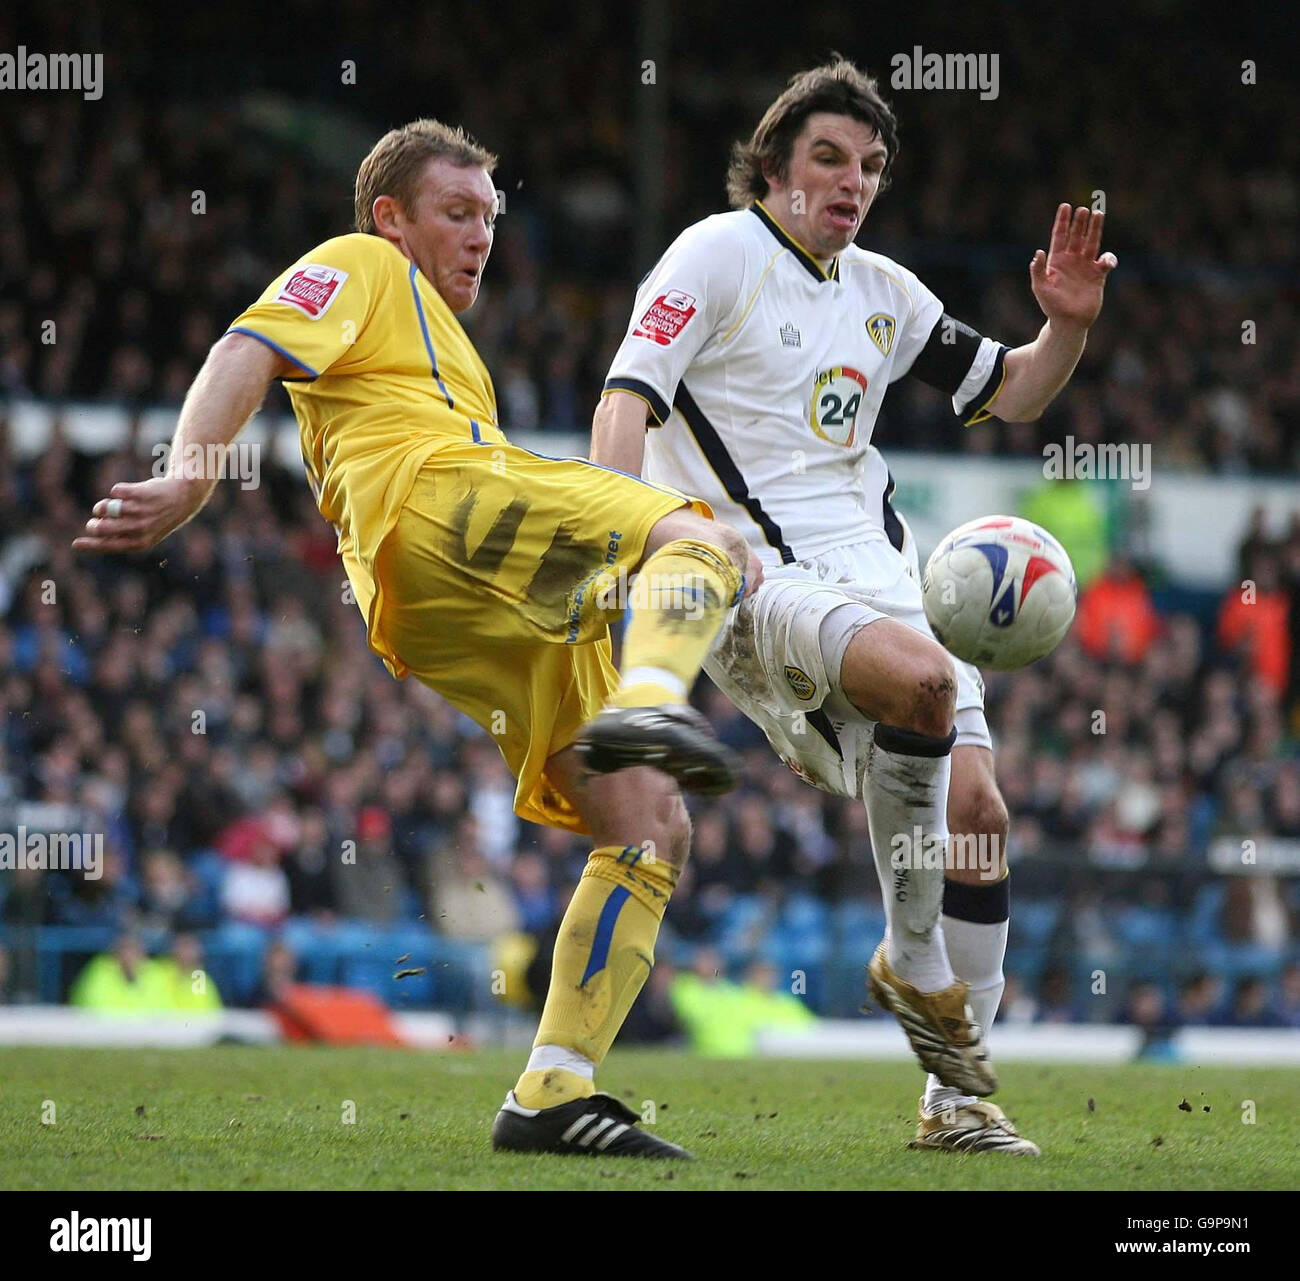 Leeds United's Jonathan Dougla (right)s and Sheffield Wednesday's Steve Watson battle for the ball during the Coca-Cola Football League Championship match at Elland Road, Leeds. Stock Photo